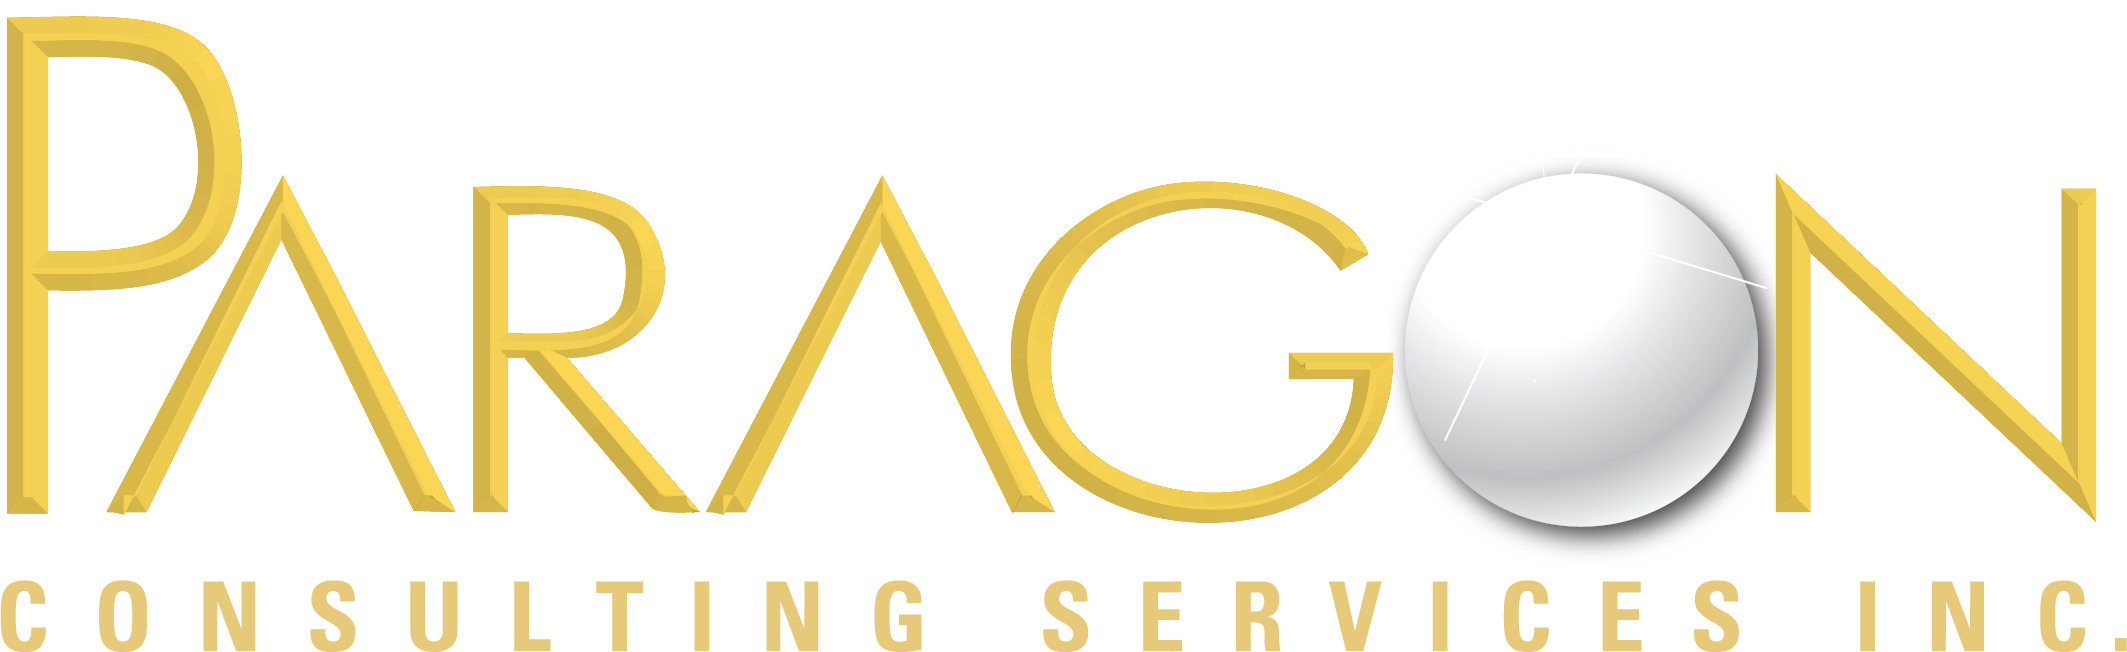 Paragon Consulting Services, Inc. - A model of excellence